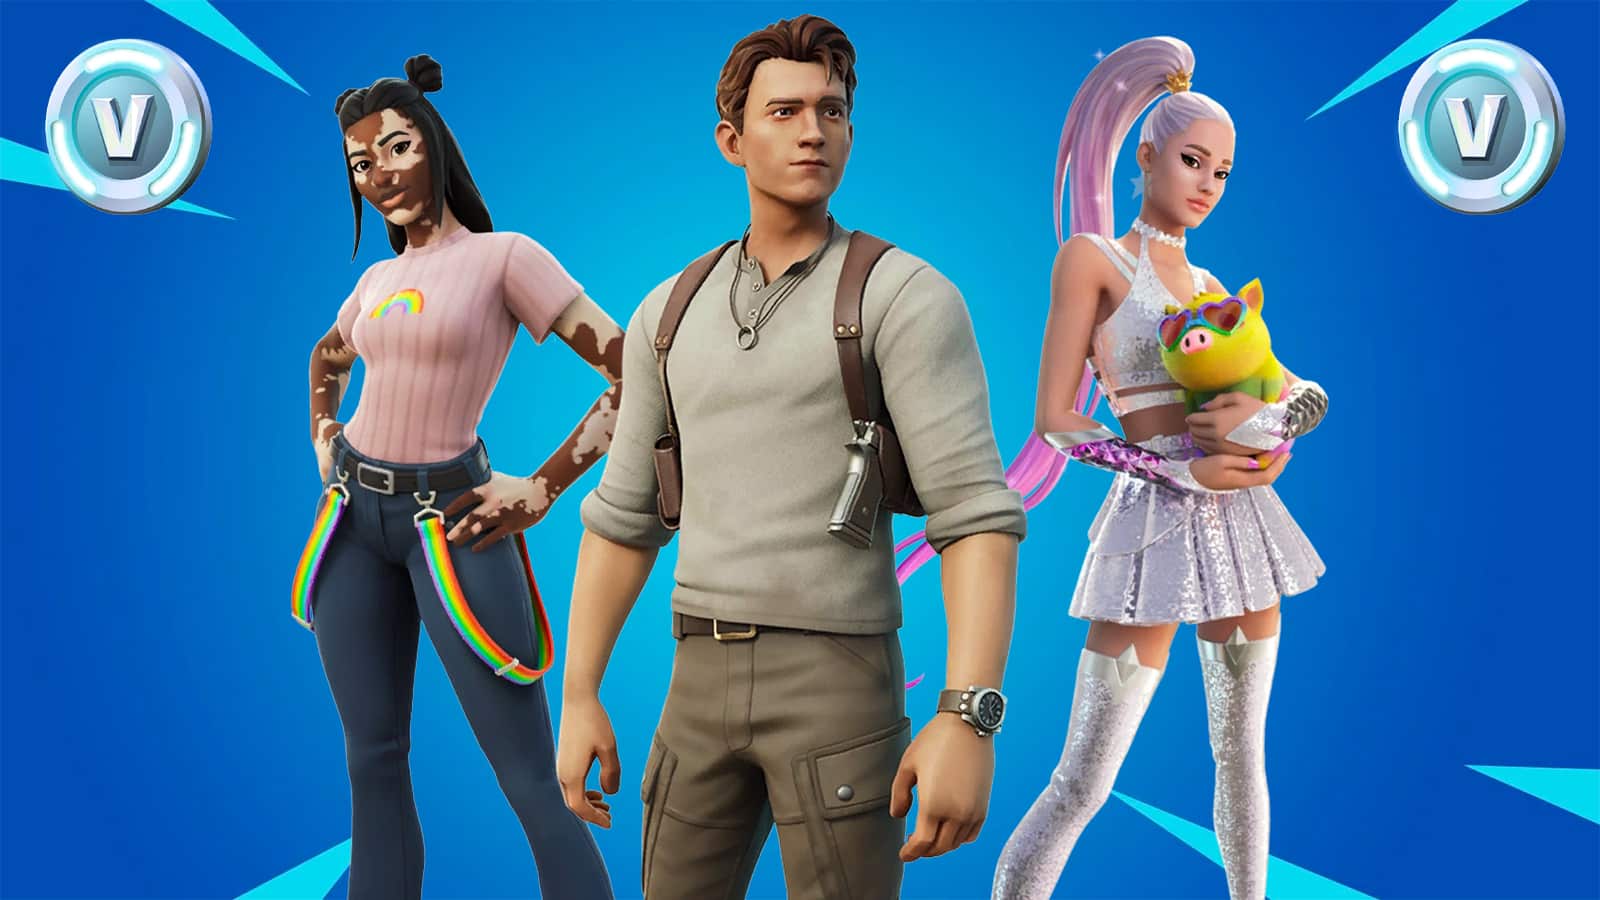 What Is In The Fortnite Item Shop Today